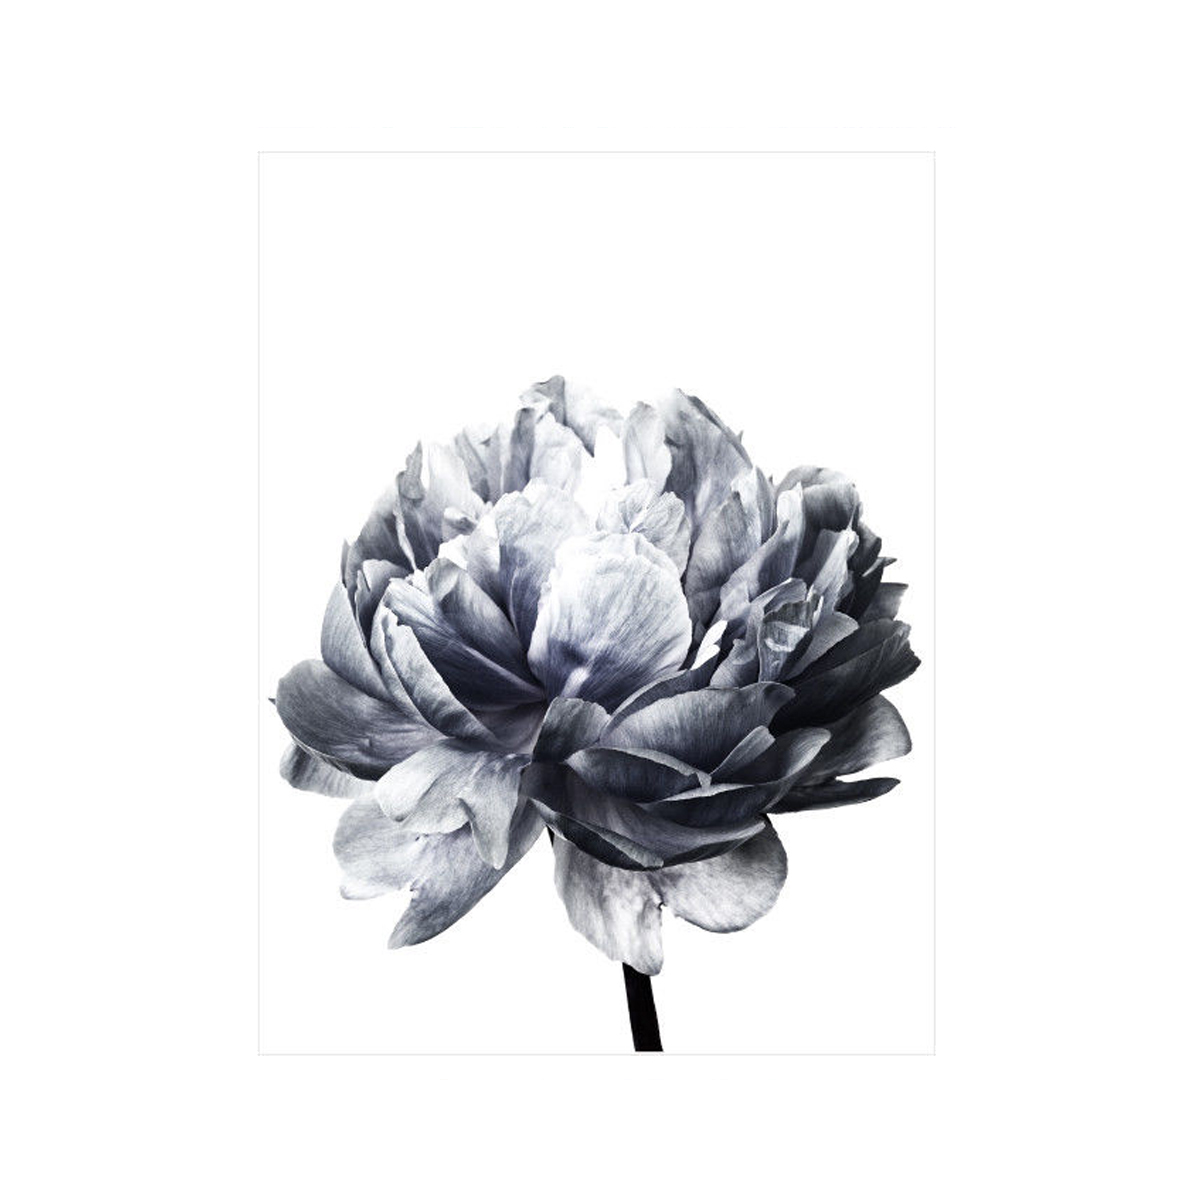 20x3030x40cm-Flower-Modern-Wall-Art-Canvas-Paintings-Picture-Home-Decor-Mural-Poster-with-Frame-1632681-8